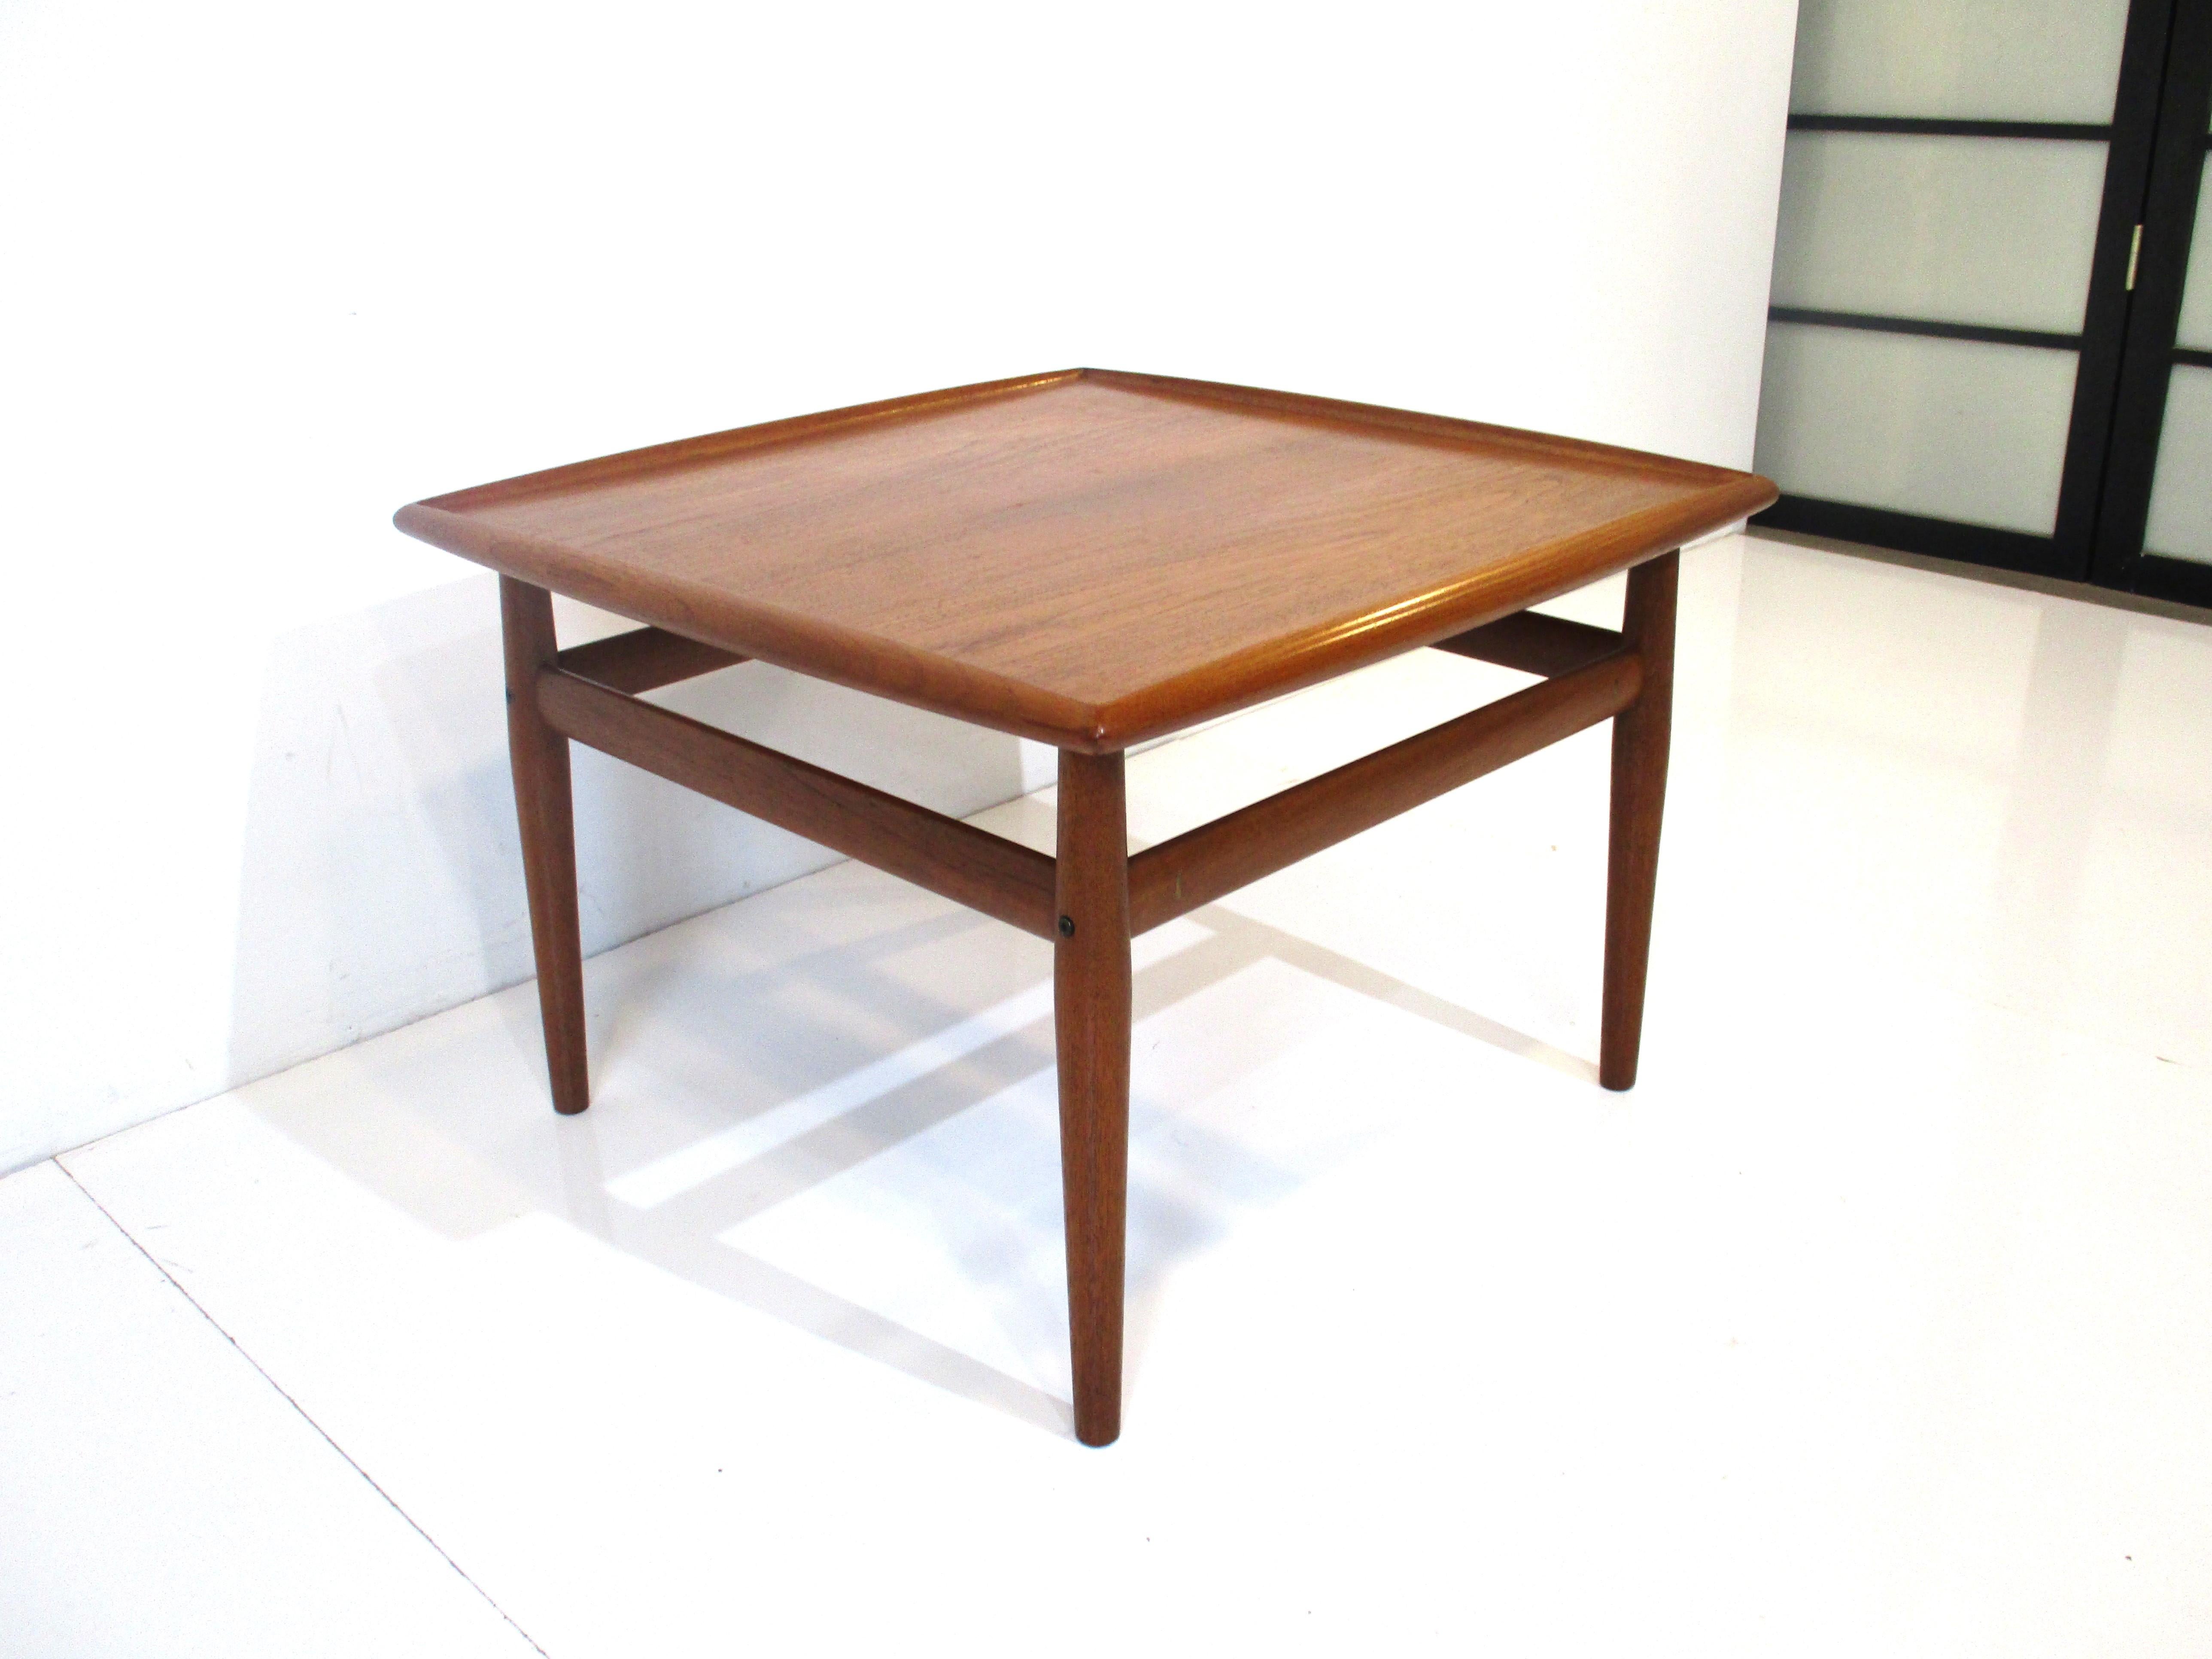 A teak wood coffee table with very well crafted upper lip to the top and stretchers to each leg having brass details . Manufactured in Denmark and designed by the iconic female designer Grete Jalk.